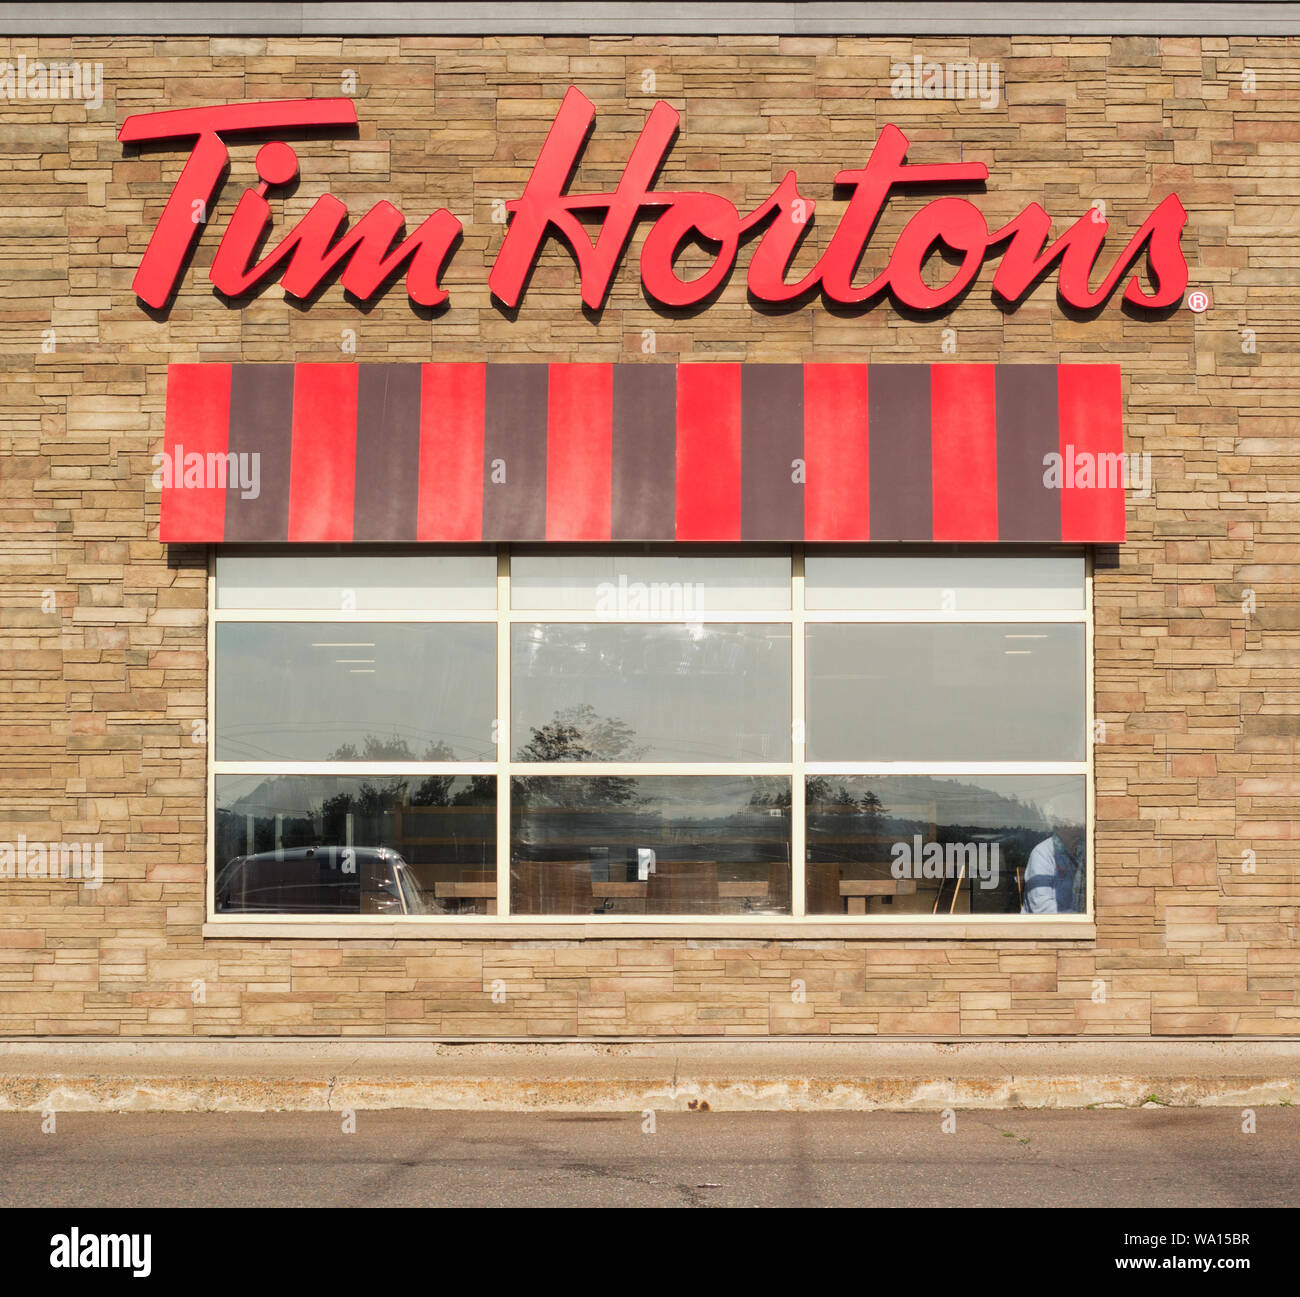 Truro, Canada - August 16, 2019: Tim Hortons restaurant. Tim Hortons is a Canadian restaurant chain known for its coffee and doughnuts. Stock Photo